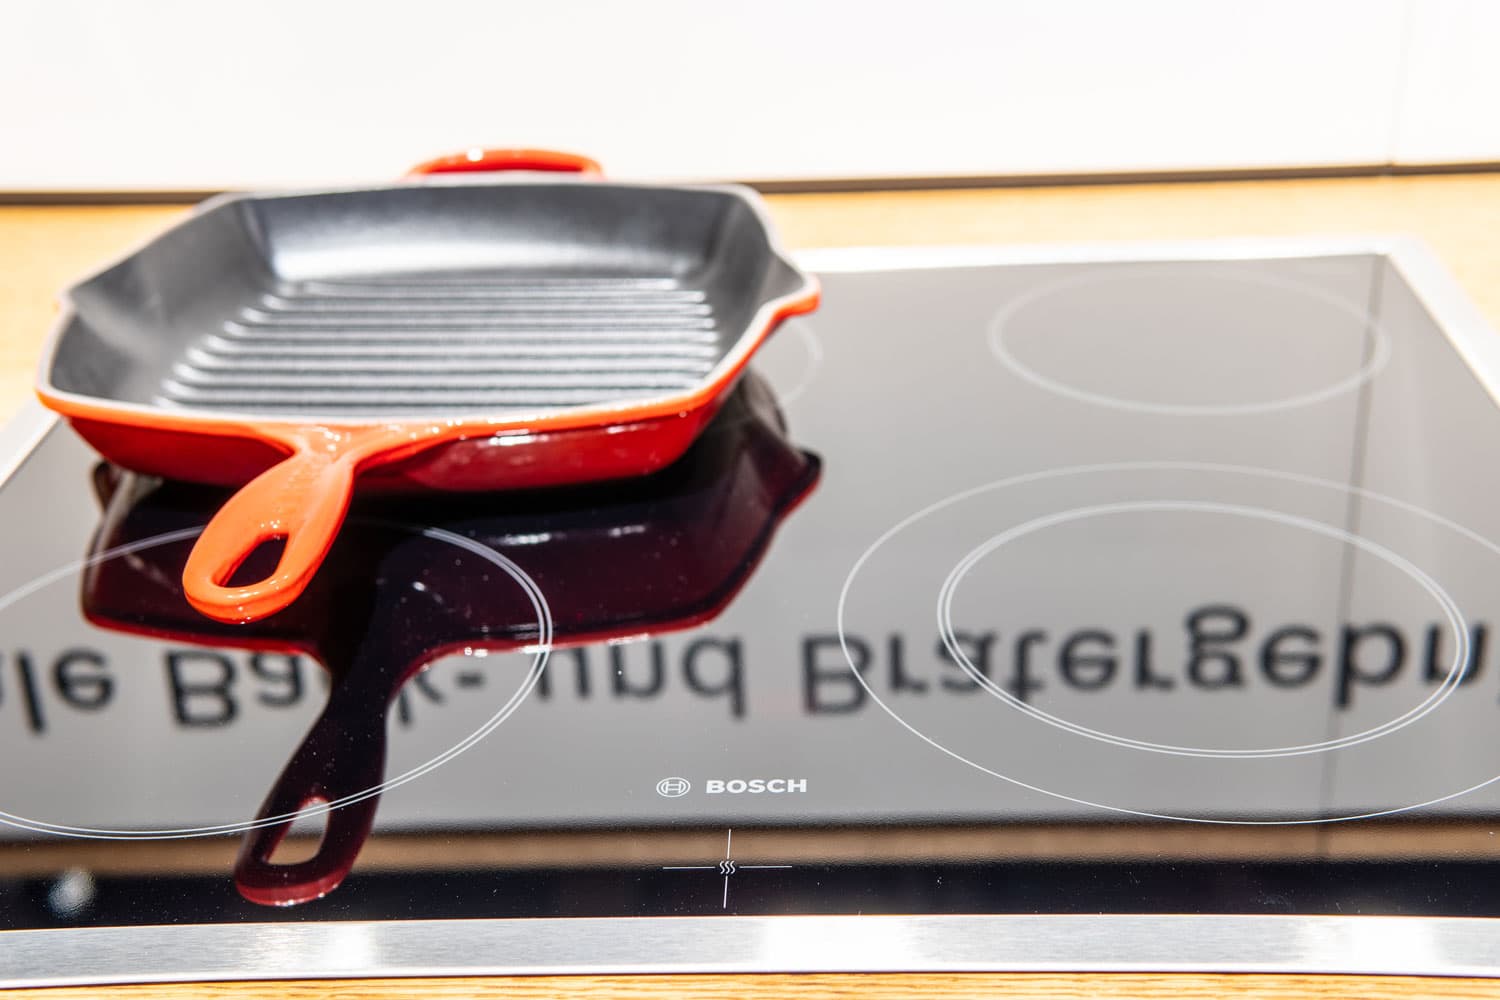 A non stick skillet placed on top of a bosch induction cooker